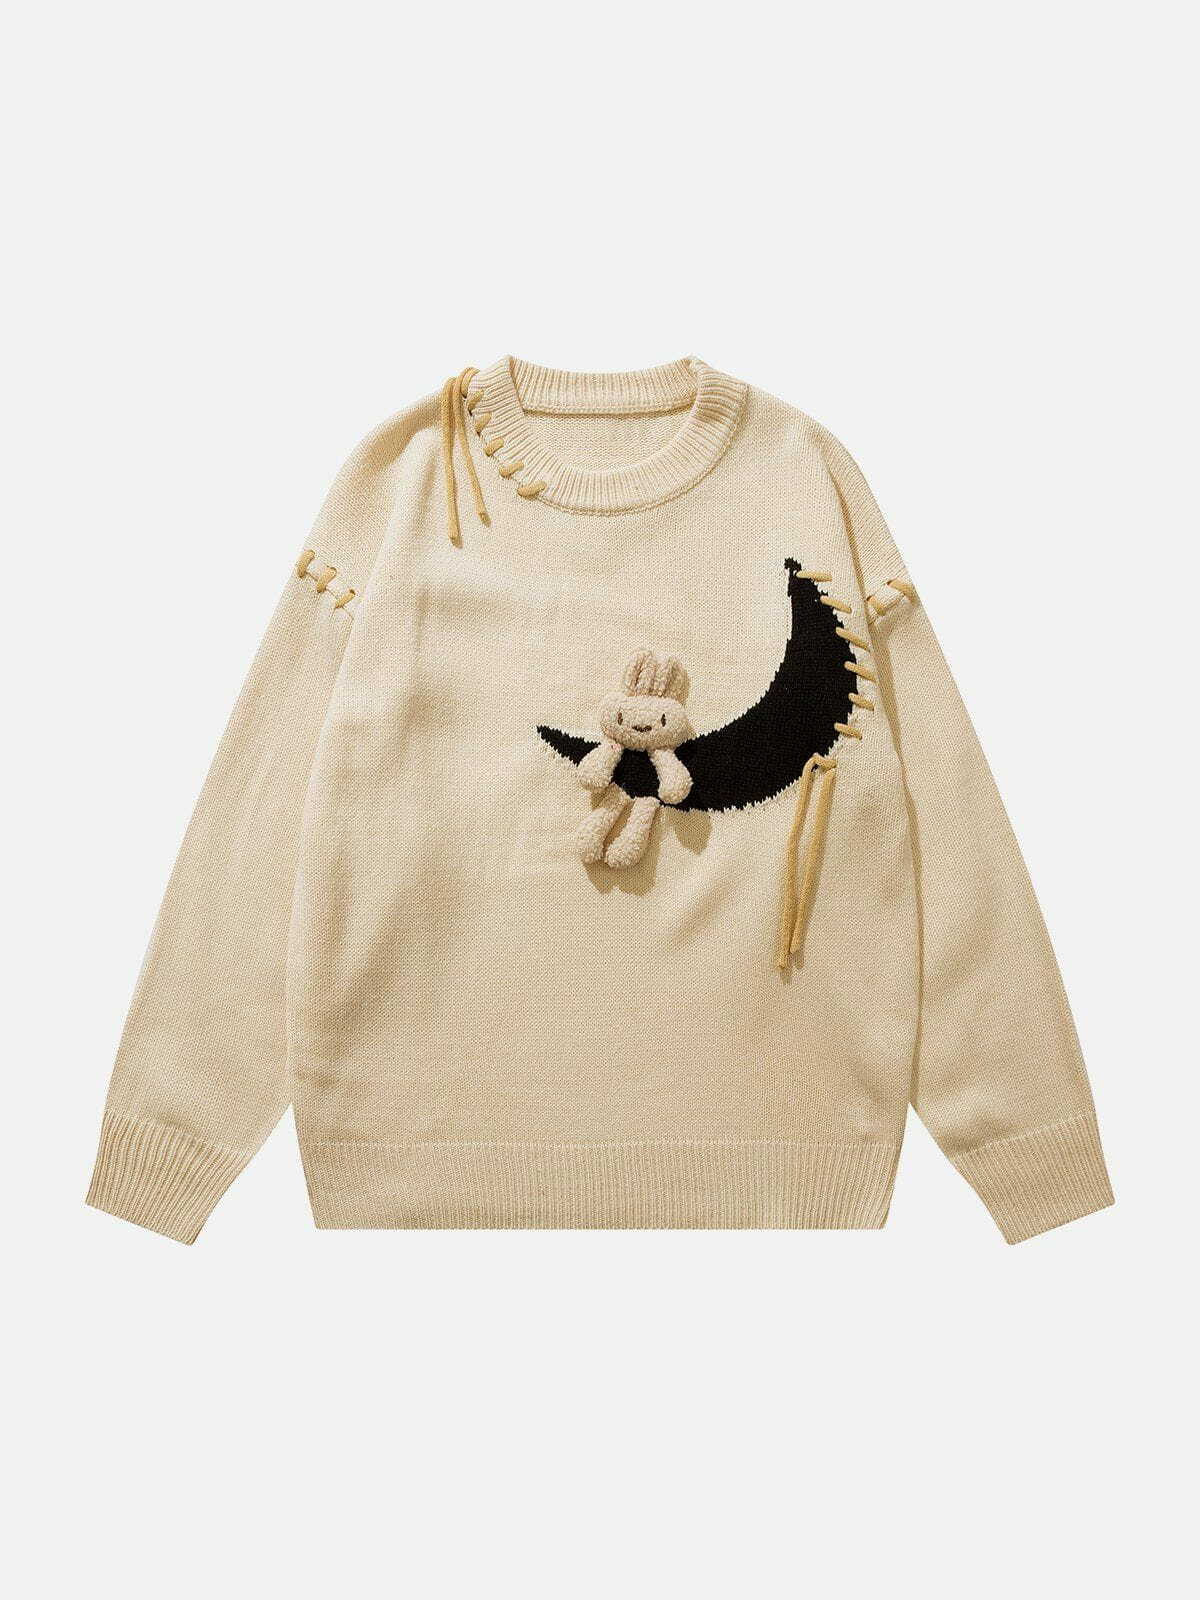 adorable rabbit straps sweater quirky & youthful fashion 3242